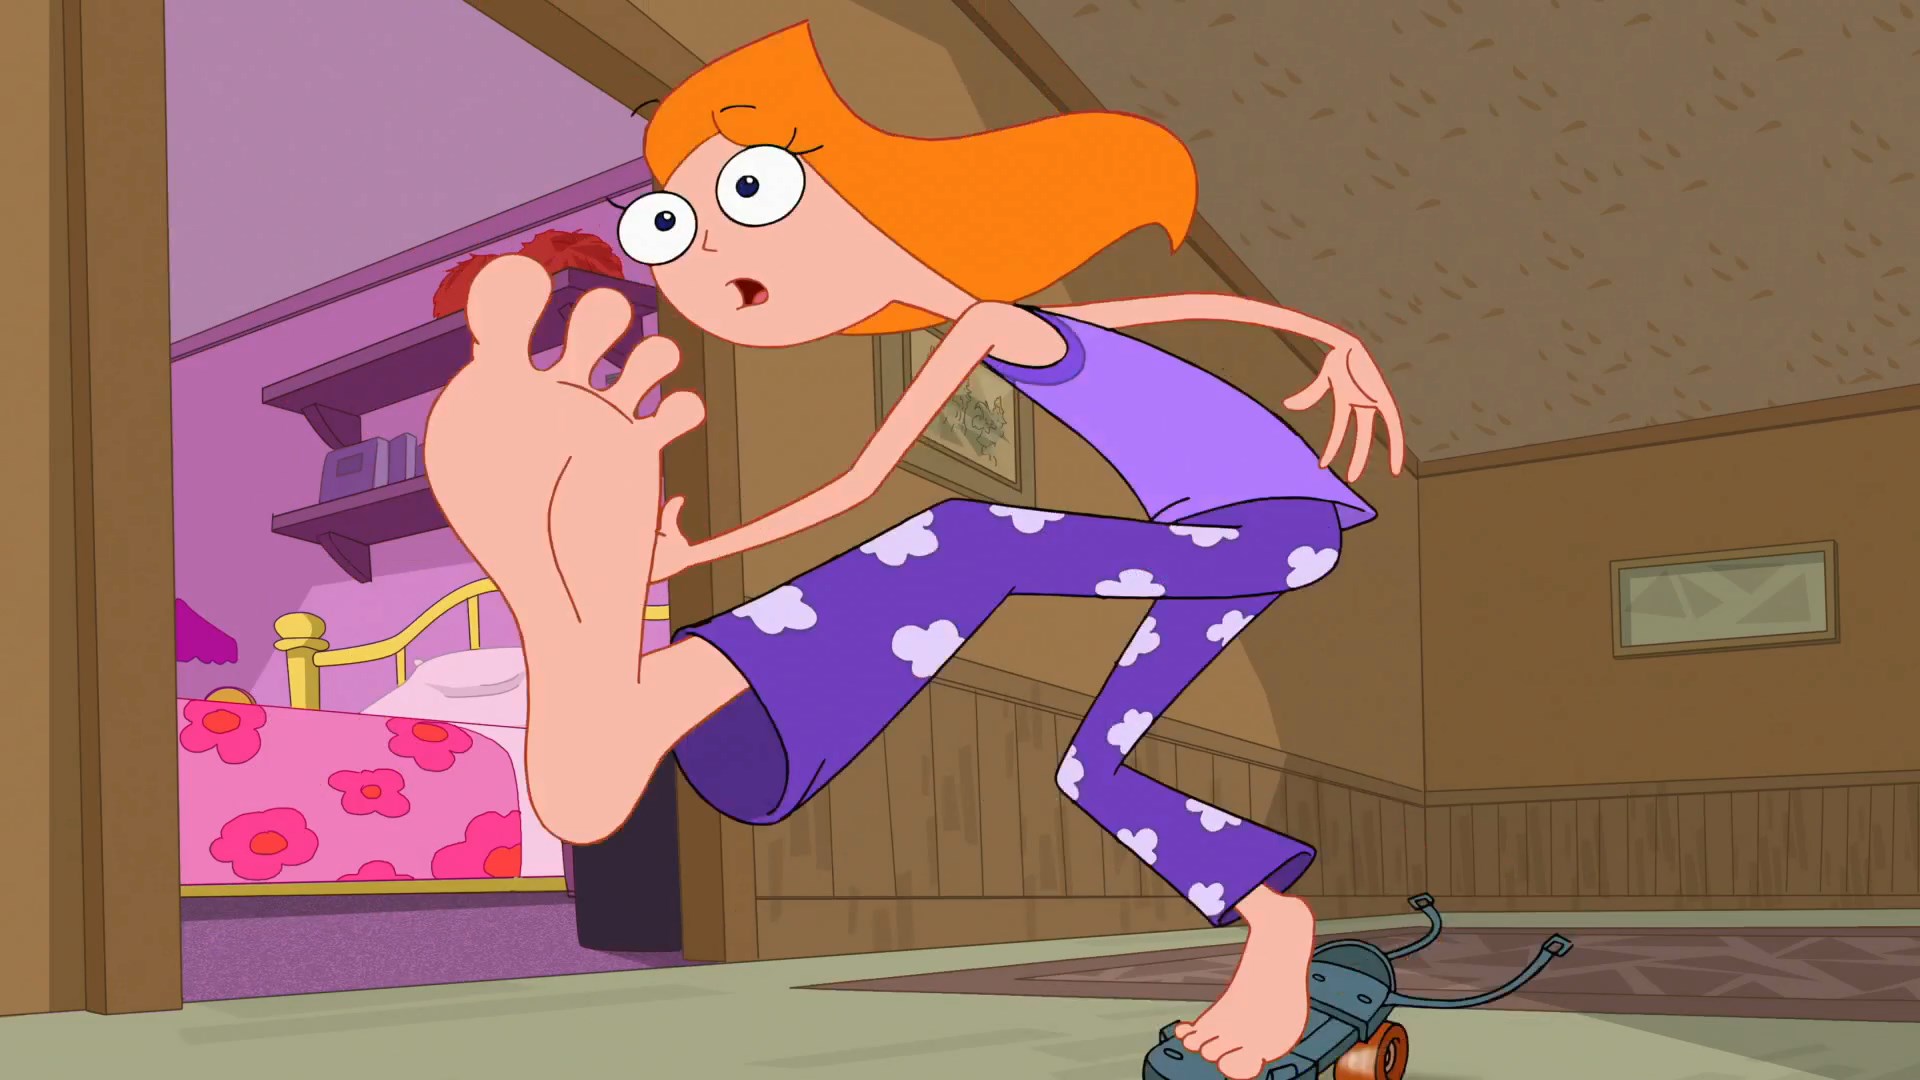 Phineas and Ferb thread.